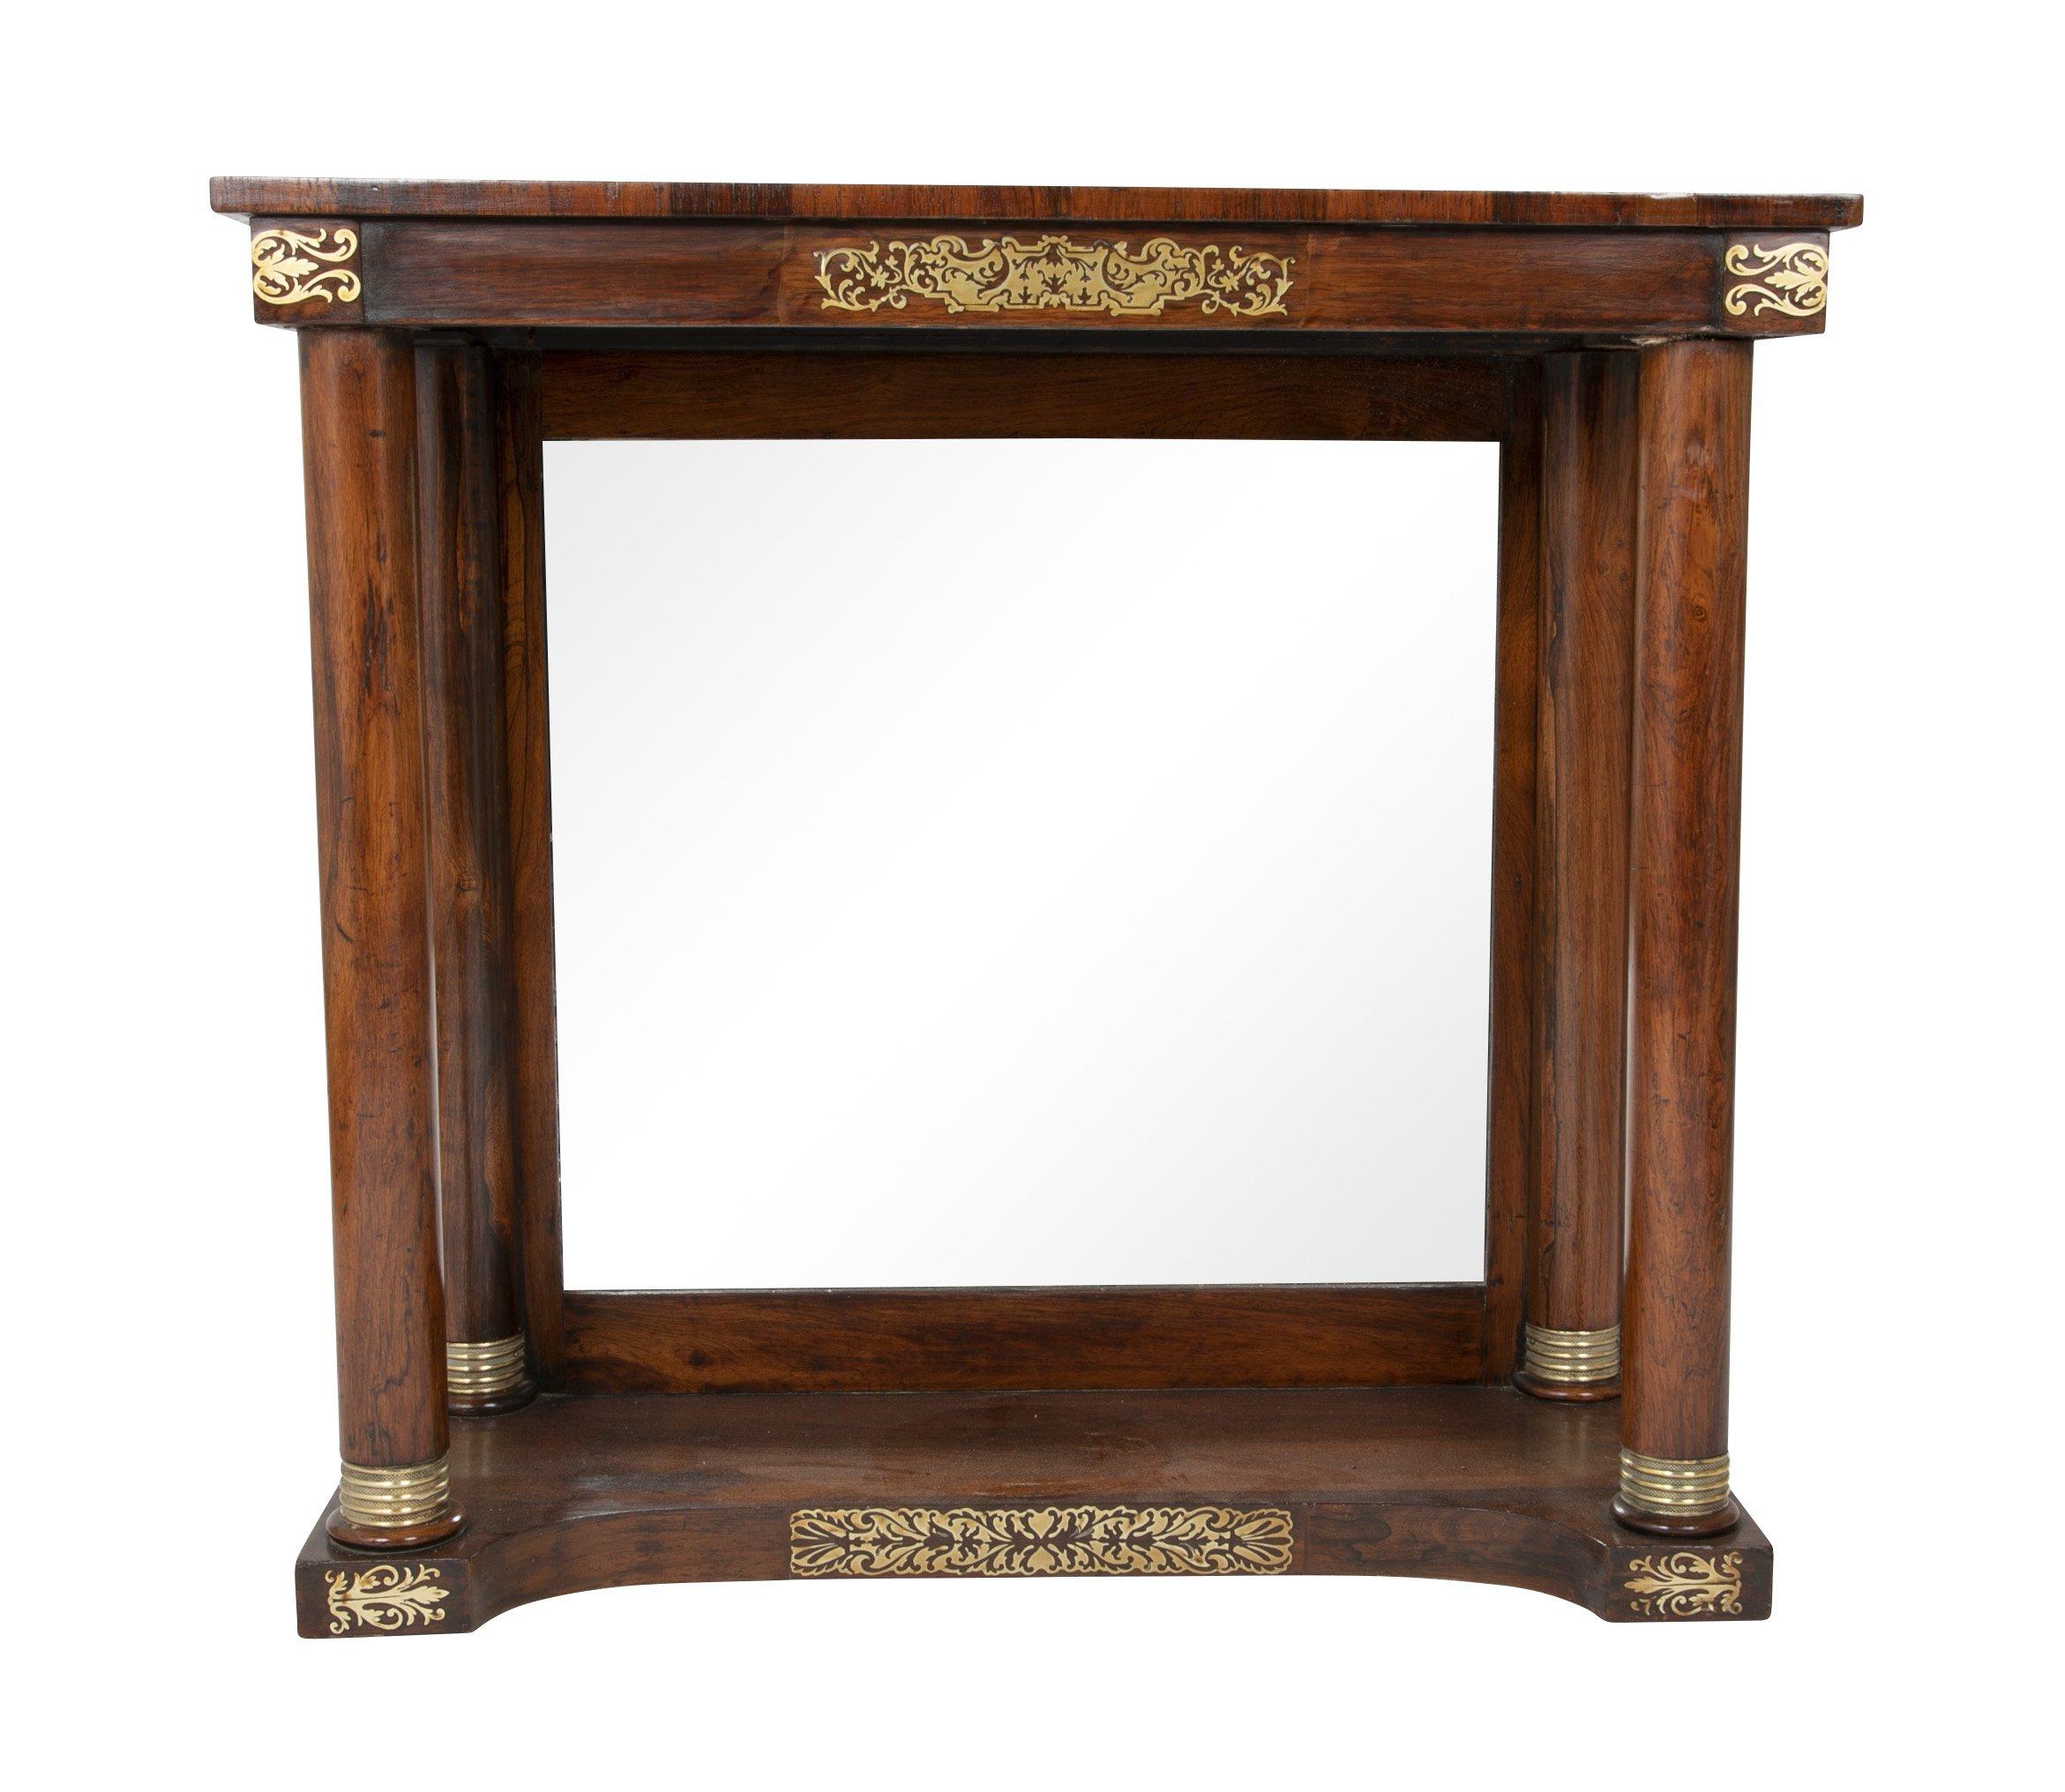 English Regency rosewood mirror back console table with bronze collars and brass inlay, circa 1815.